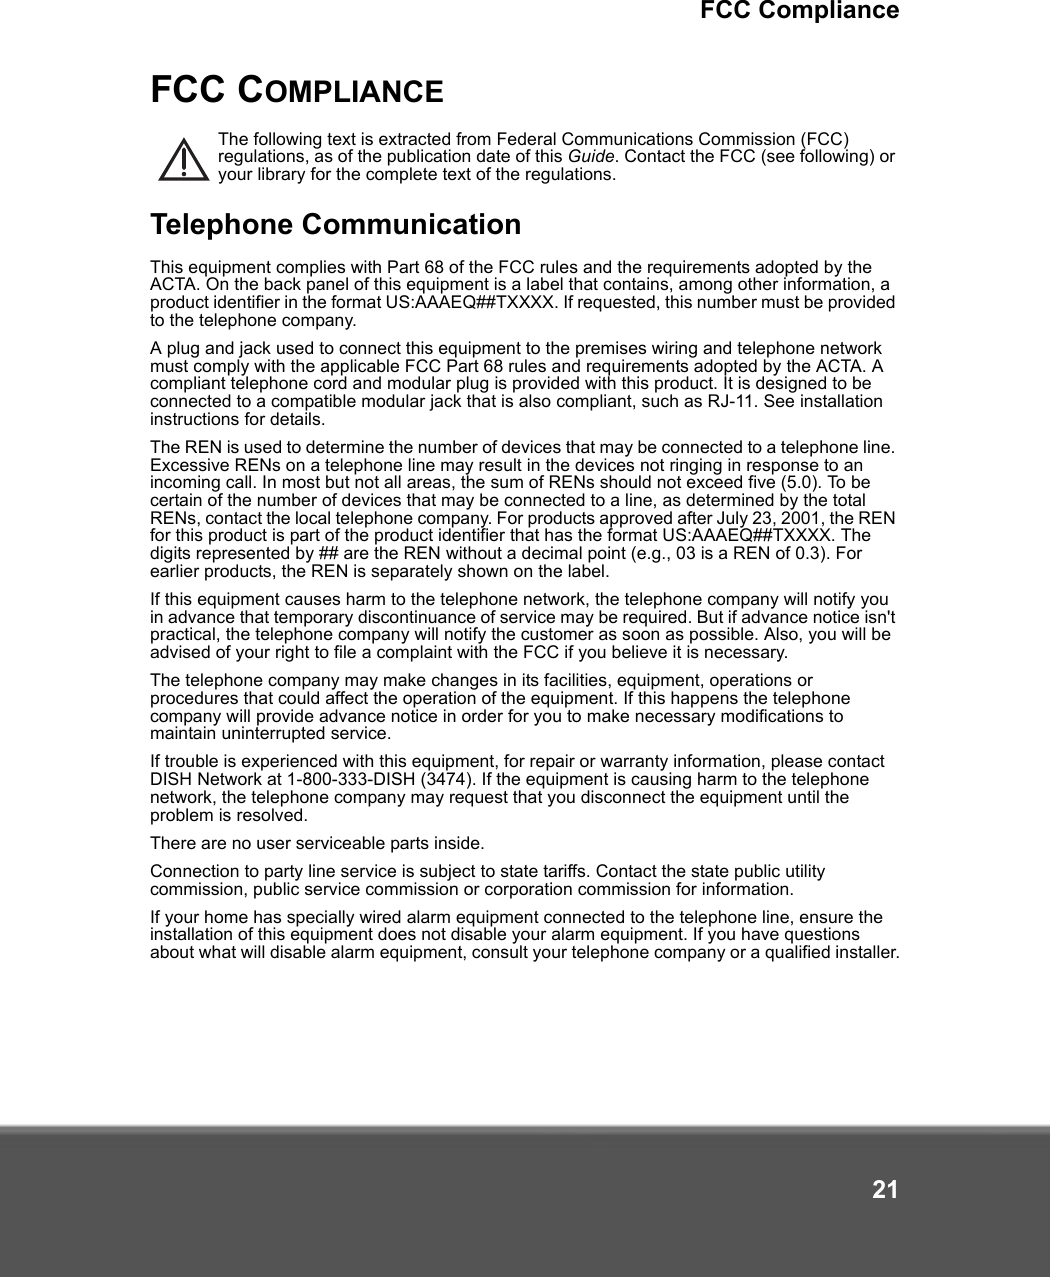 FCC Compliance21FCC COMPLIANCEThe following text is extracted from Federal Communications Commission (FCC) regulations, as of the publication date of this Guide. Contact the FCC (see following) or your library for the complete text of the regulations.Telephone CommunicationThis equipment complies with Part 68 of the FCC rules and the requirements adopted by the ACTA. On the back panel of this equipment is a label that contains, among other information, a product identifier in the format US:AAAEQ##TXXXX. If requested, this number must be provided to the telephone company.A plug and jack used to connect this equipment to the premises wiring and telephone network must comply with the applicable FCC Part 68 rules and requirements adopted by the ACTA. A compliant telephone cord and modular plug is provided with this product. It is designed to be connected to a compatible modular jack that is also compliant, such as RJ-11. See installation instructions for details.The REN is used to determine the number of devices that may be connected to a telephone line. Excessive RENs on a telephone line may result in the devices not ringing in response to an incoming call. In most but not all areas, the sum of RENs should not exceed five (5.0). To be certain of the number of devices that may be connected to a line, as determined by the total RENs, contact the local telephone company. For products approved after July 23, 2001, the REN for this product is part of the product identifier that has the format US:AAAEQ##TXXXX. The digits represented by ## are the REN without a decimal point (e.g., 03 is a REN of 0.3). For earlier products, the REN is separately shown on the label.If this equipment causes harm to the telephone network, the telephone company will notify you in advance that temporary discontinuance of service may be required. But if advance notice isn&apos;t practical, the telephone company will notify the customer as soon as possible. Also, you will be advised of your right to file a complaint with the FCC if you believe it is necessary.The telephone company may make changes in its facilities, equipment, operations or procedures that could affect the operation of the equipment. If this happens the telephone company will provide advance notice in order for you to make necessary modifications to maintain uninterrupted service.If trouble is experienced with this equipment, for repair or warranty information, please contact DISH Network at 1-800-333-DISH (3474). If the equipment is causing harm to the telephone network, the telephone company may request that you disconnect the equipment until the problem is resolved.There are no user serviceable parts inside. Connection to party line service is subject to state tariffs. Contact the state public utility commission, public service commission or corporation commission for information.If your home has specially wired alarm equipment connected to the telephone line, ensure the installation of this equipment does not disable your alarm equipment. If you have questions about what will disable alarm equipment, consult your telephone company or a qualified installer.